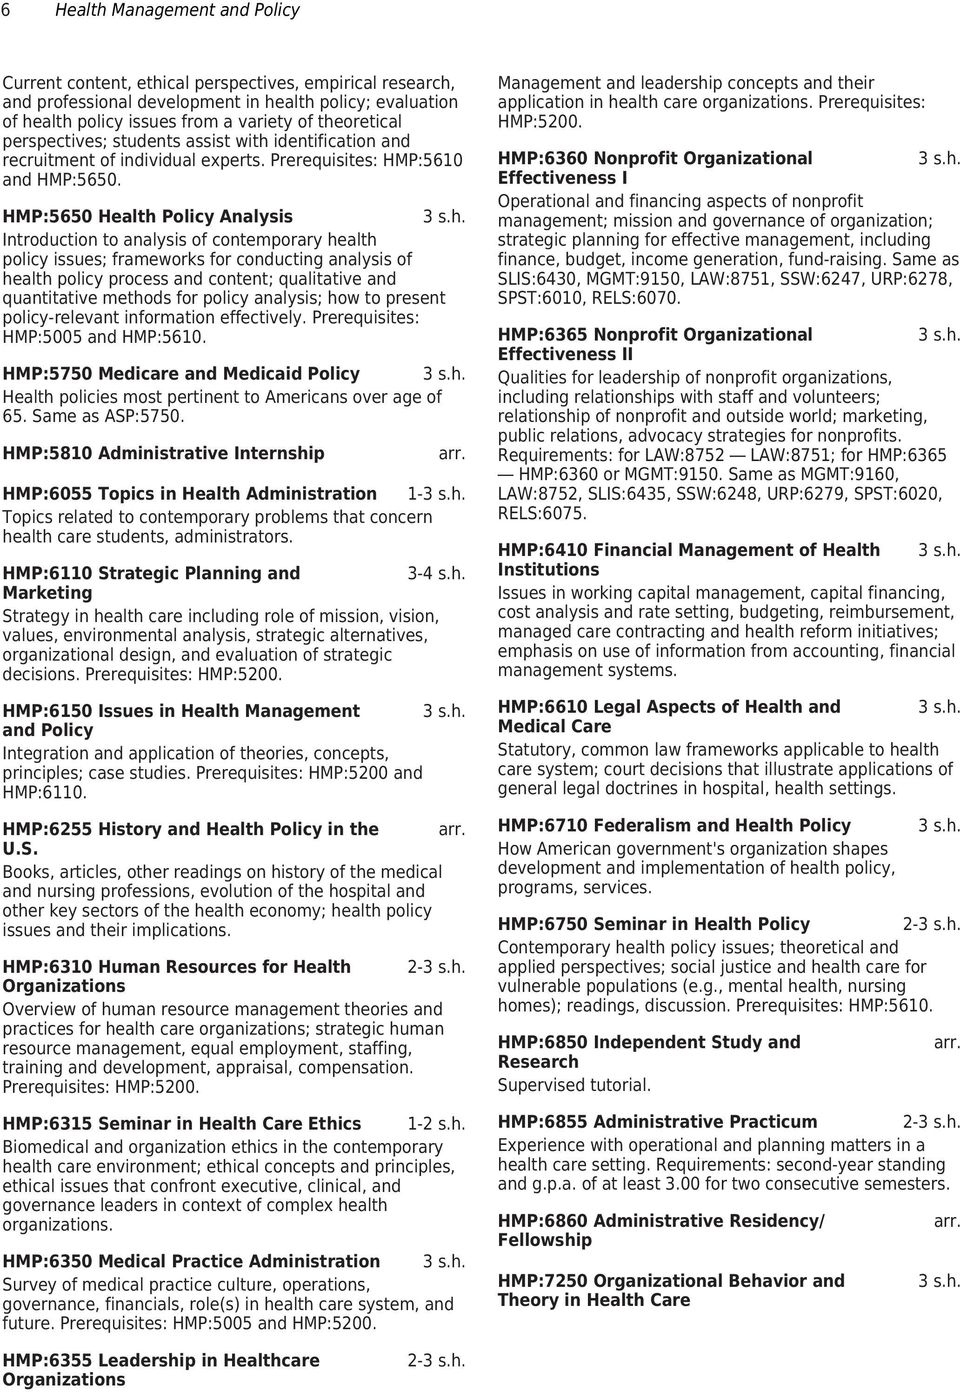 HMP:5650 Health Policy Analysis Introduction to analysis of contemporary health policy issues; frameworks for conducting analysis of health policy process and content; qualitative and quantitative